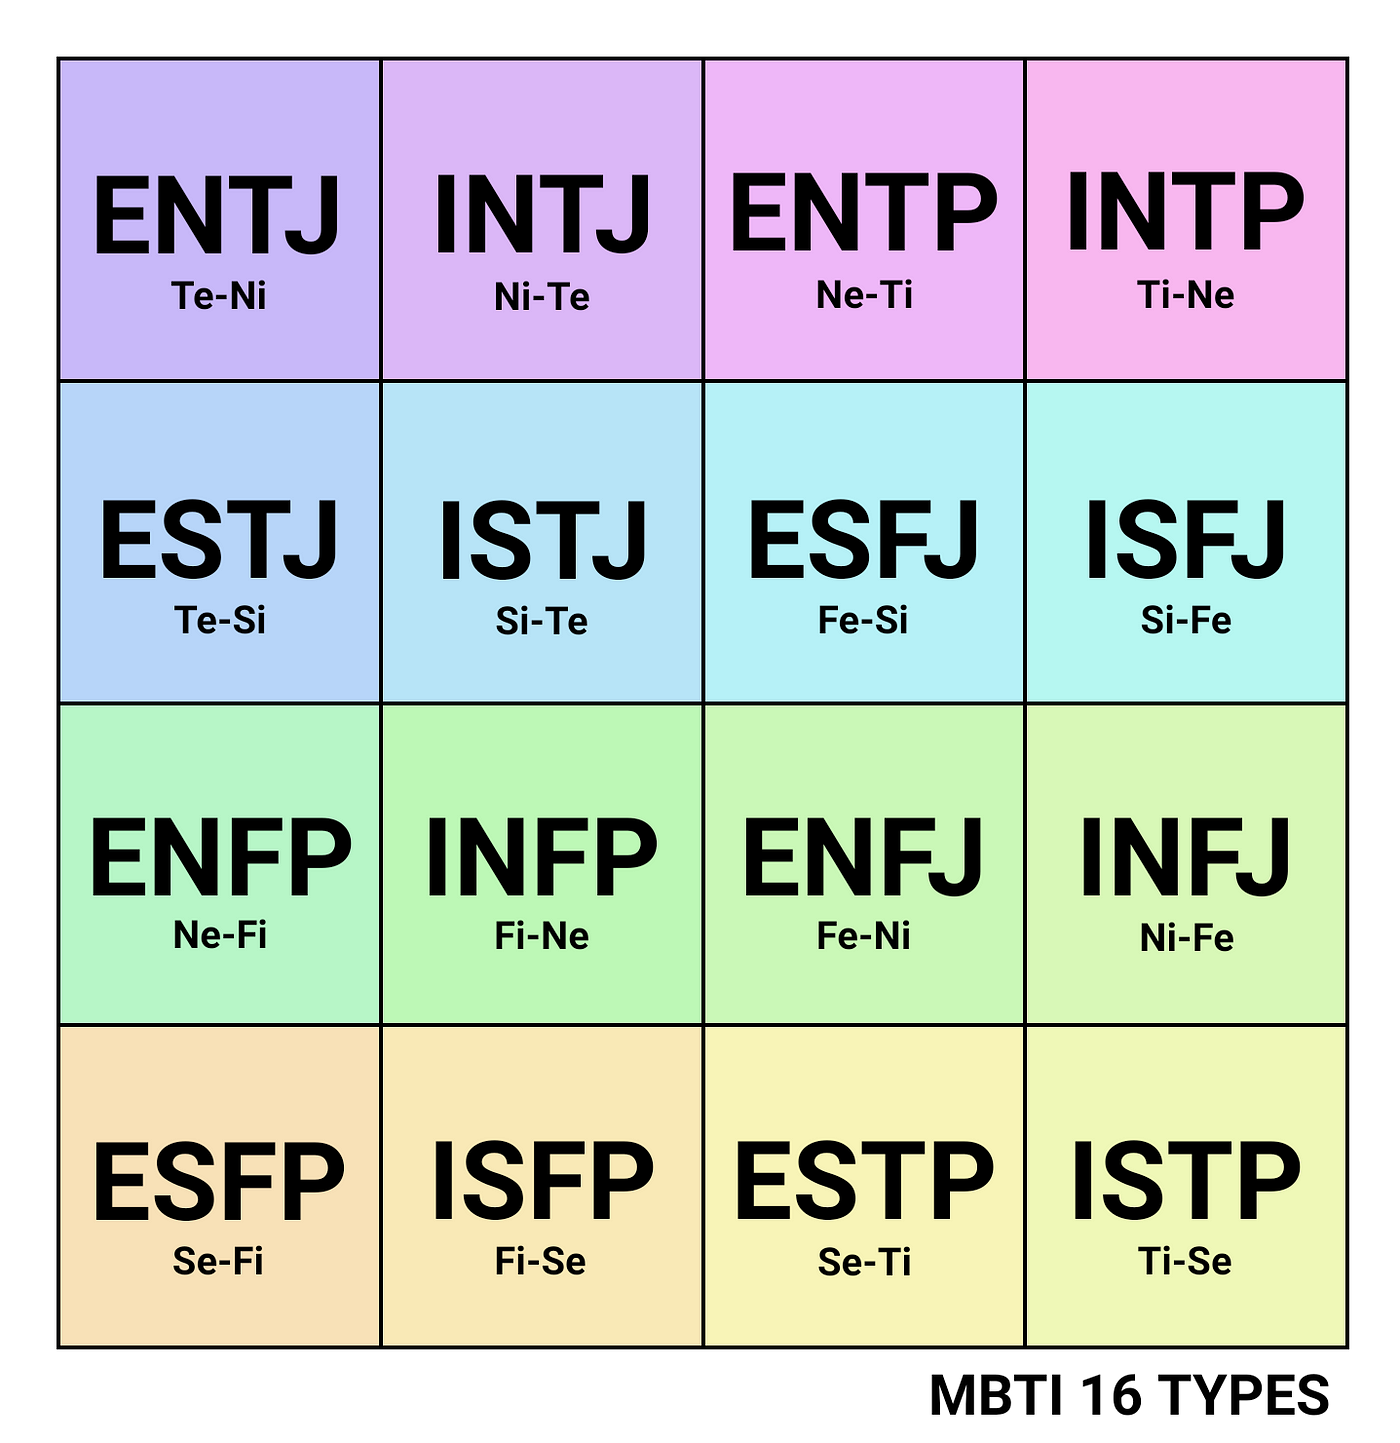 Maria Personality Type, MBTI - Which Personality?